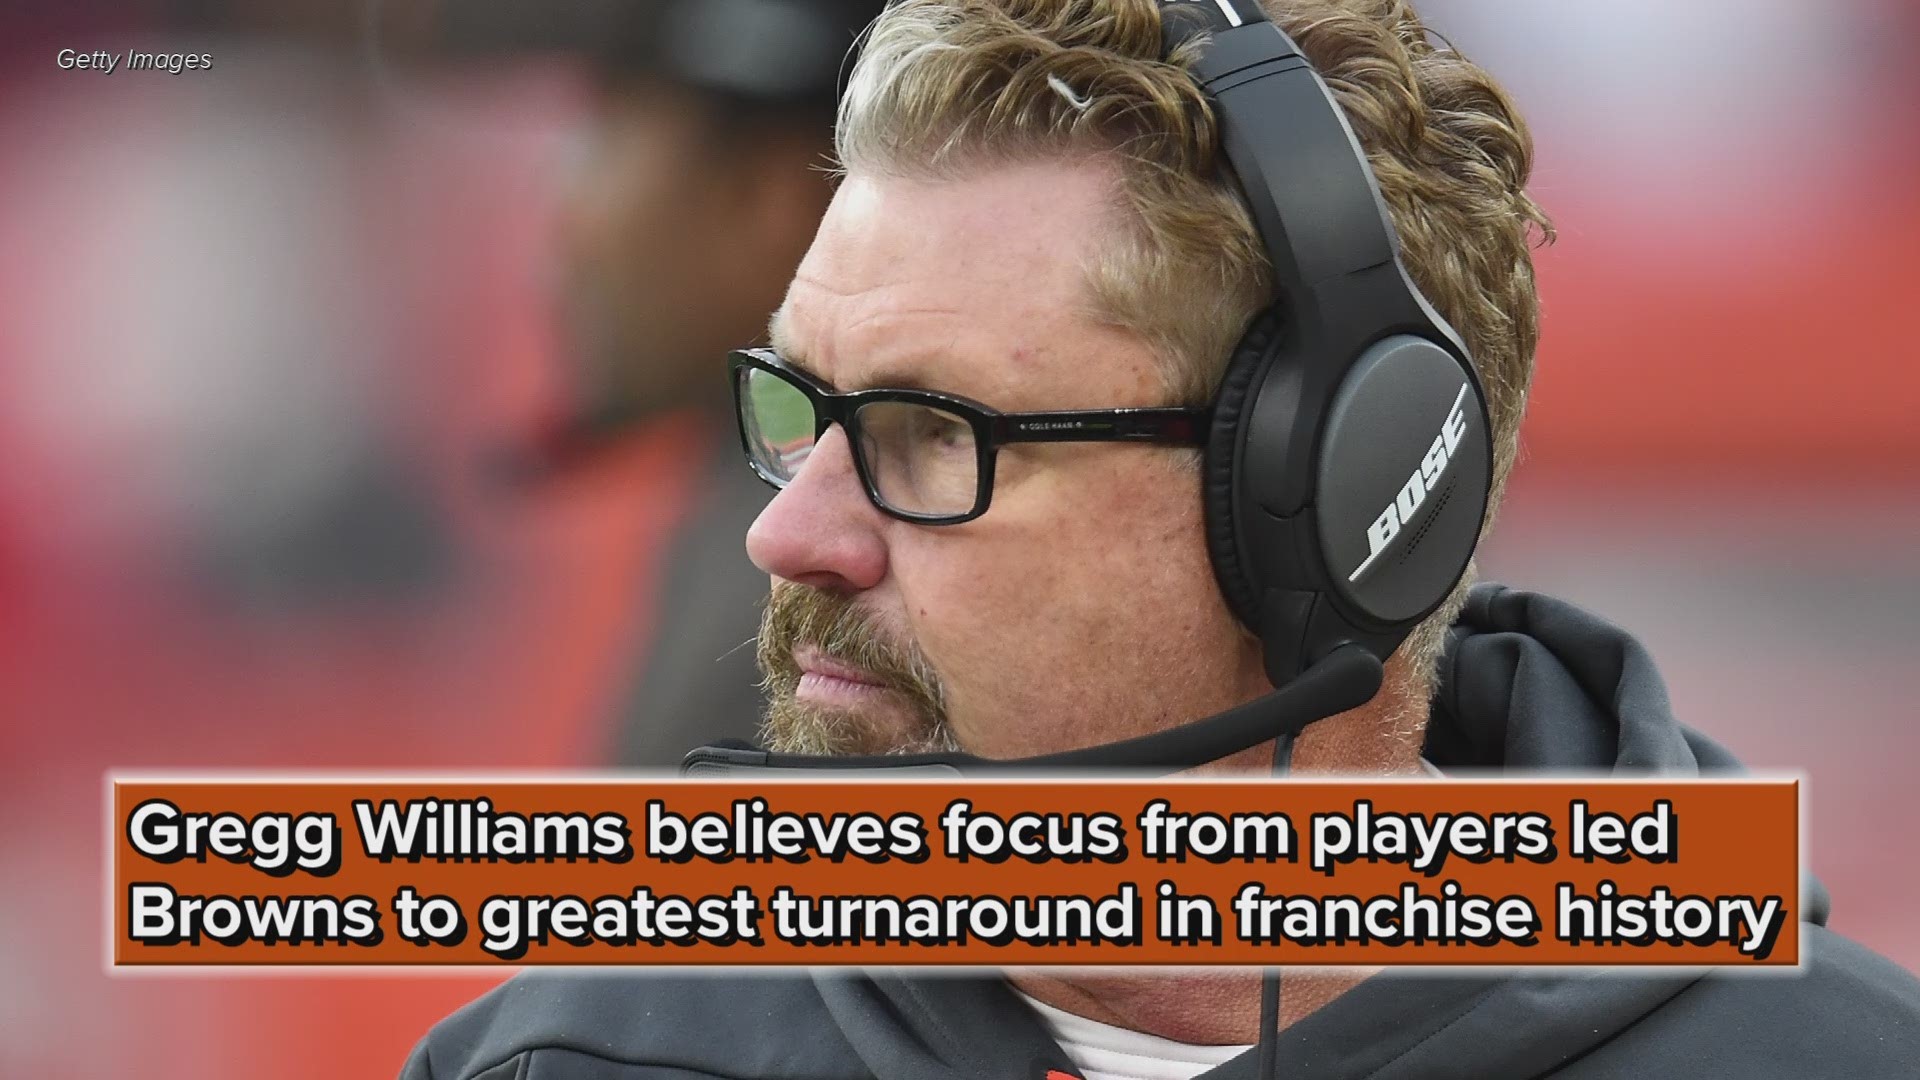 Interim coach Gregg Williams believes a high level of focus from the players have led to the greatest turnaround in Cleveland Browns history.